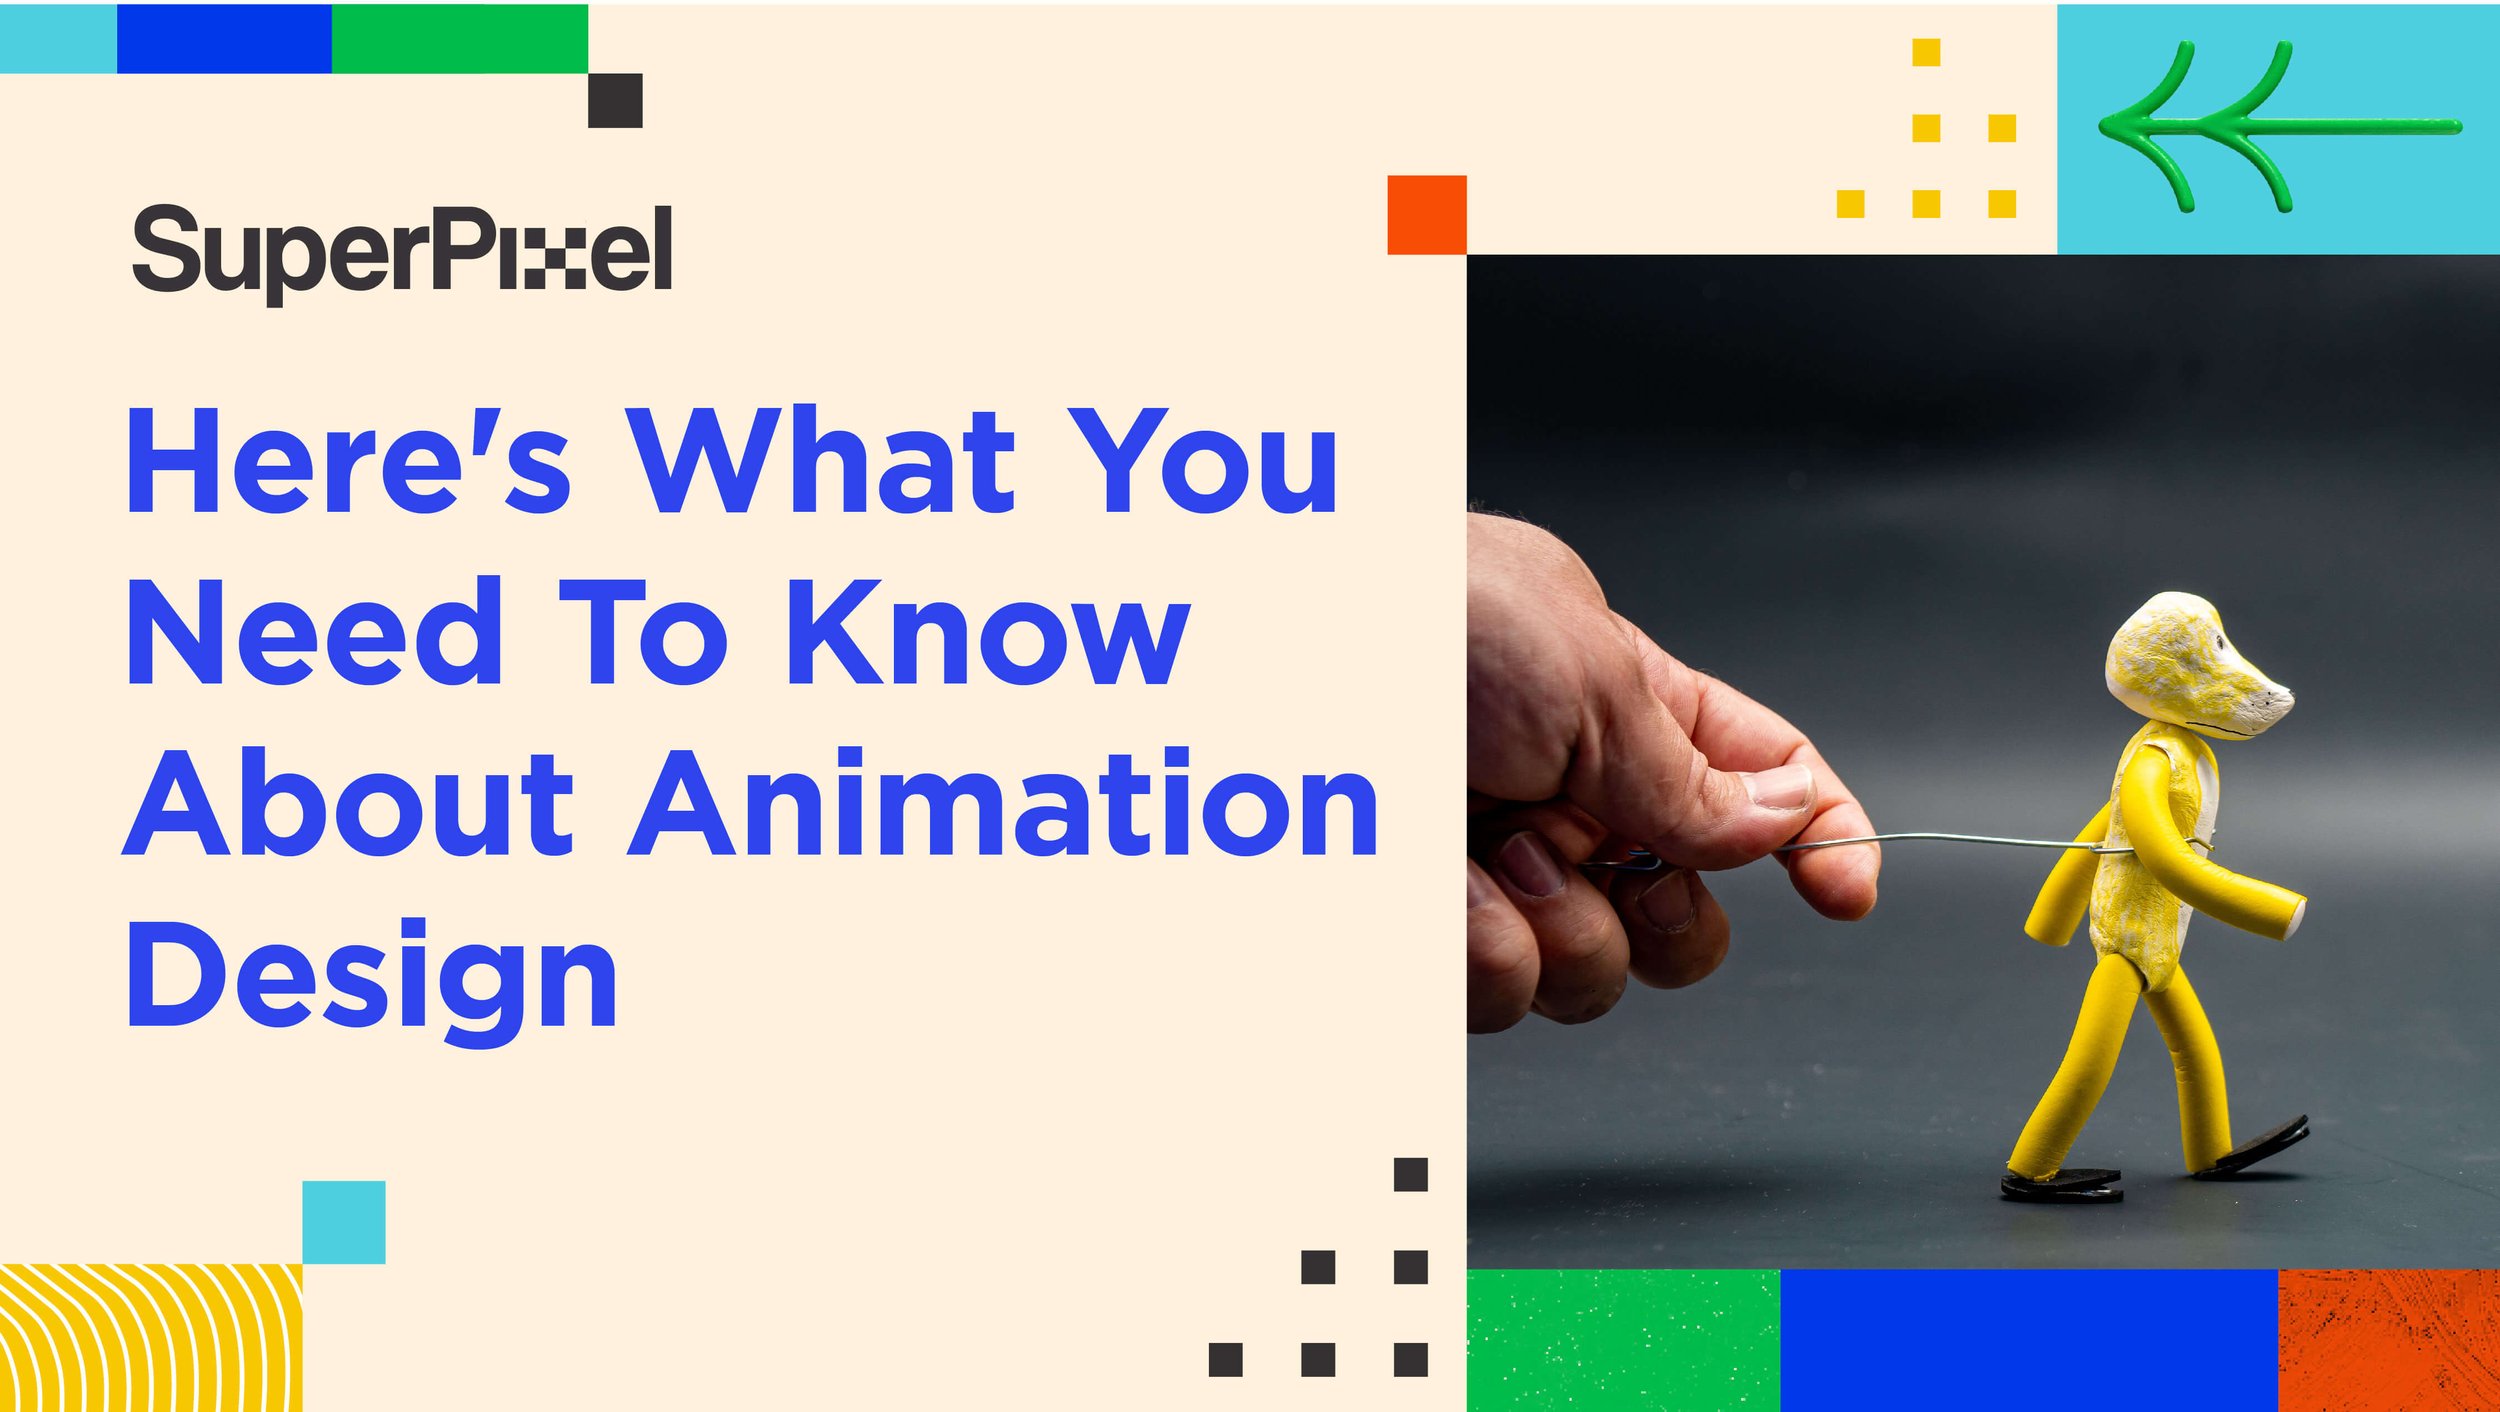 Here's What You Need To Know About Animation Design